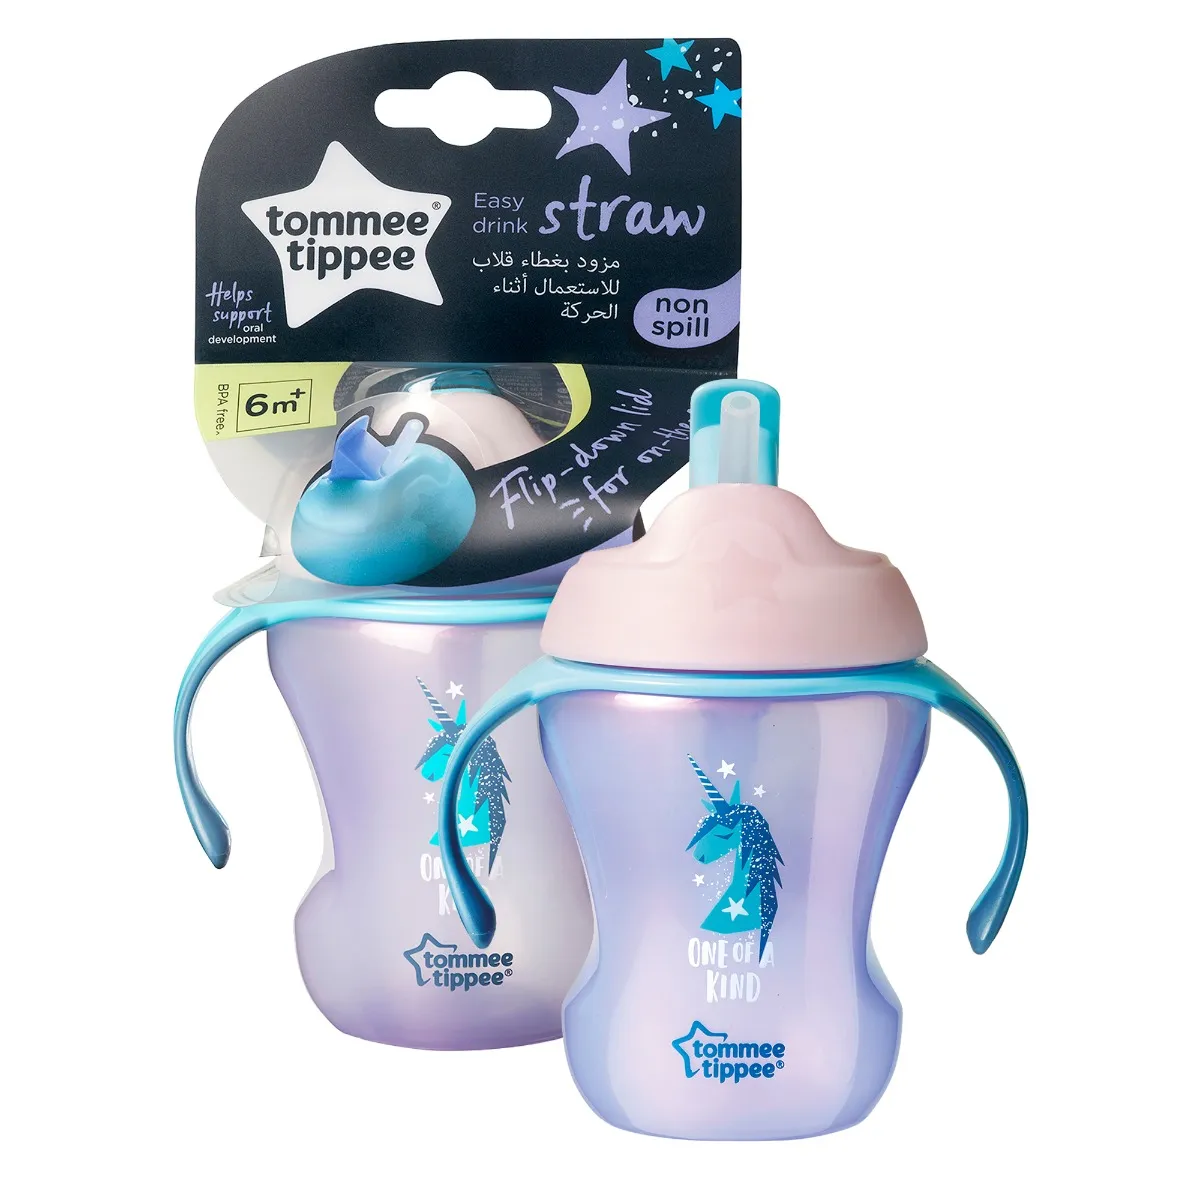 Cana cu pai Easy Drink Explora 6 luni+, 230ml, Tommee Tippee 